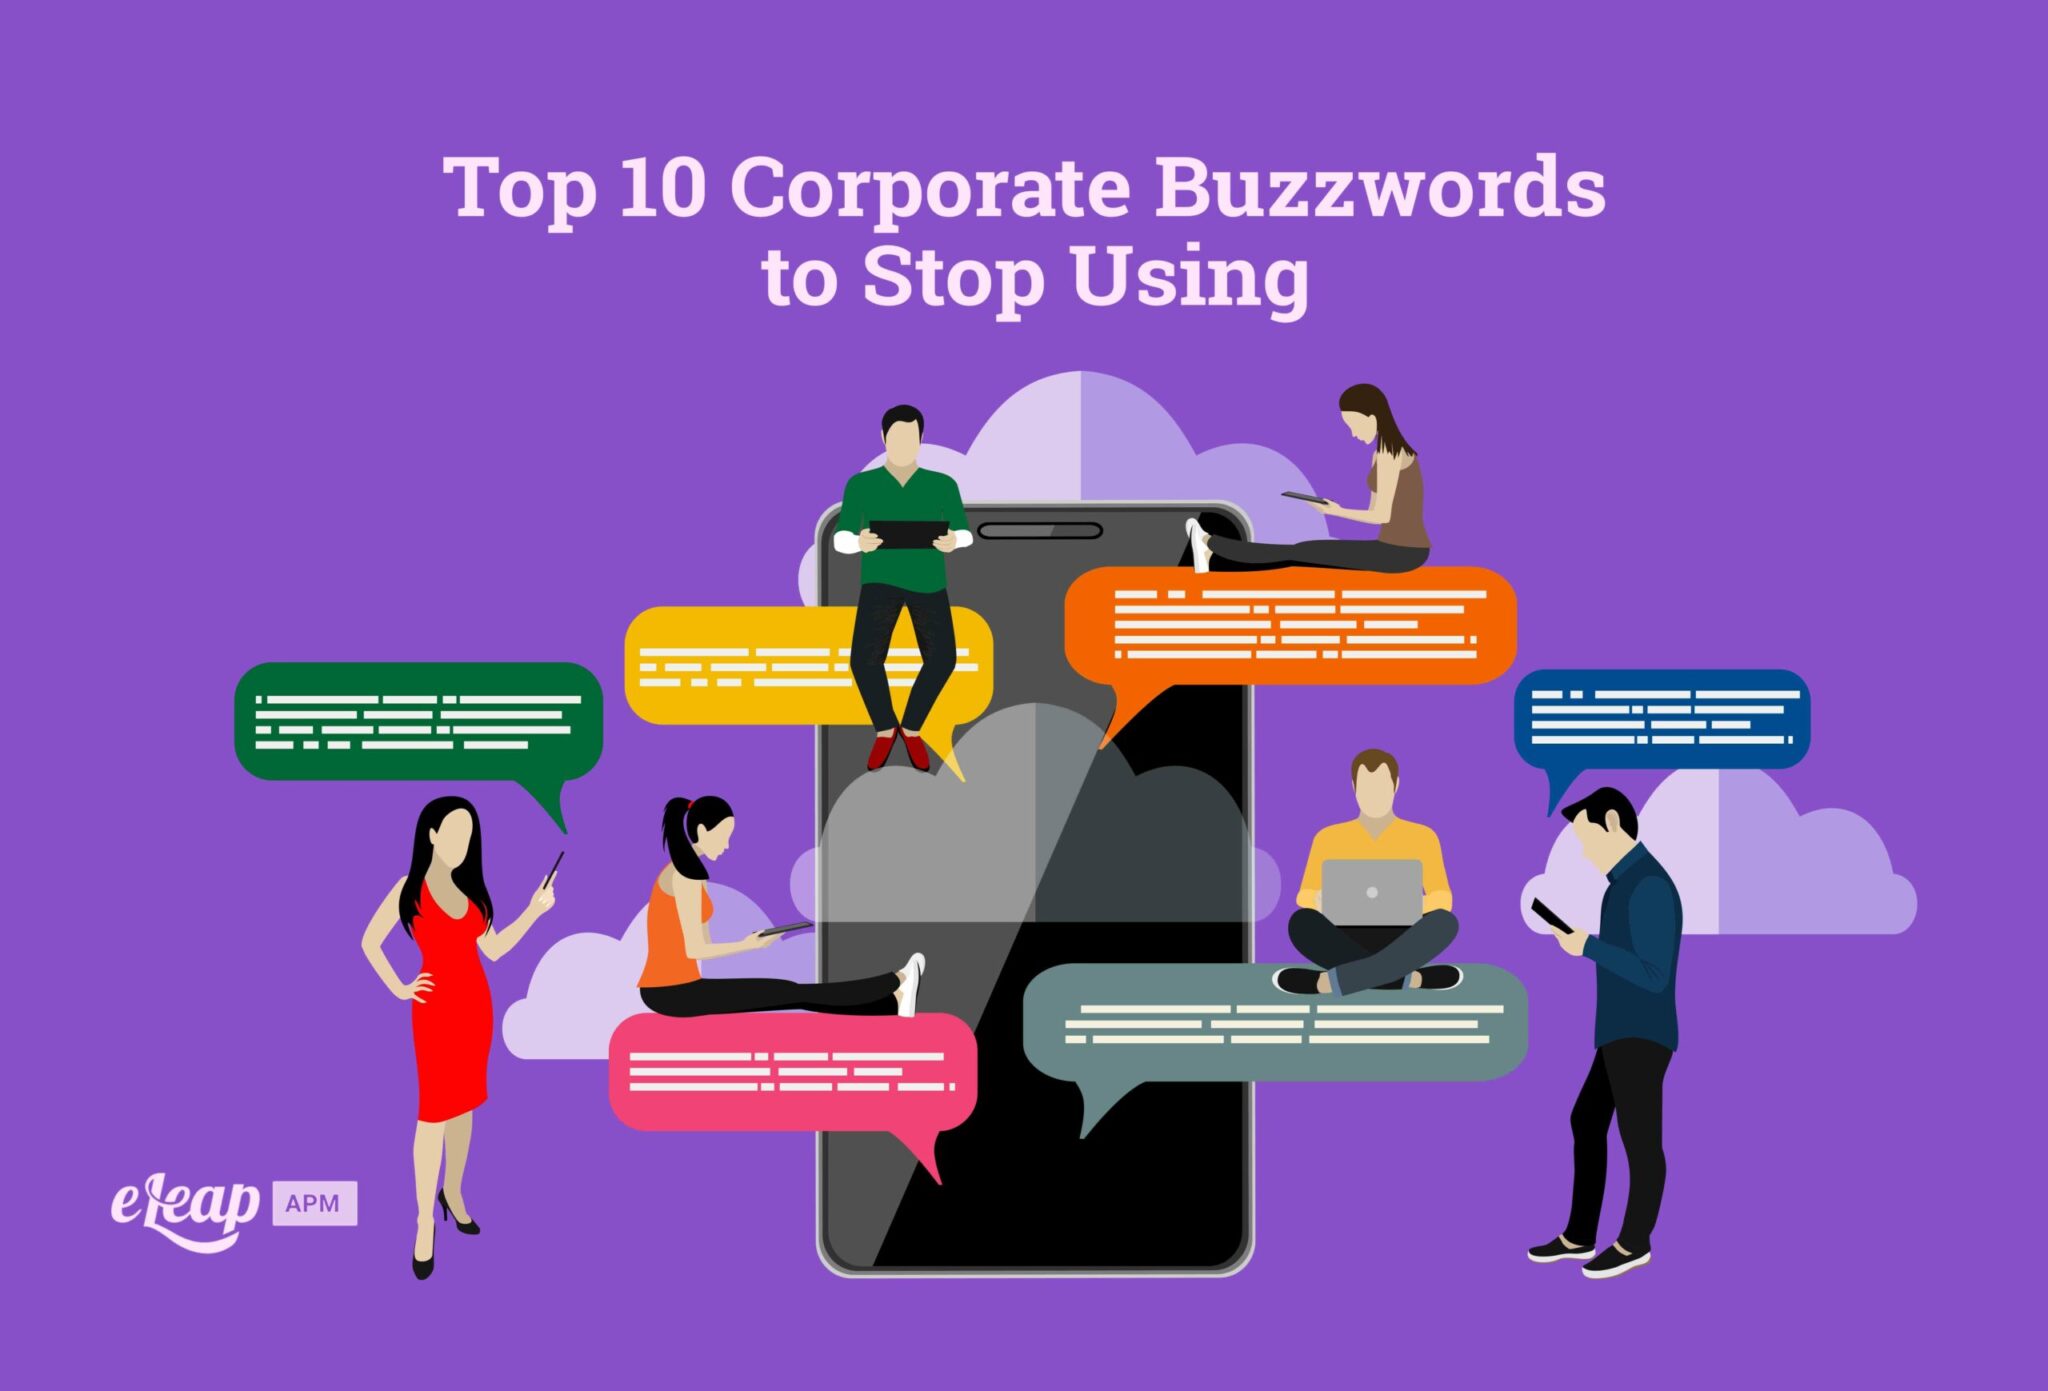 Top 10 Corporate Buzzwords to Stop Using eLeaP